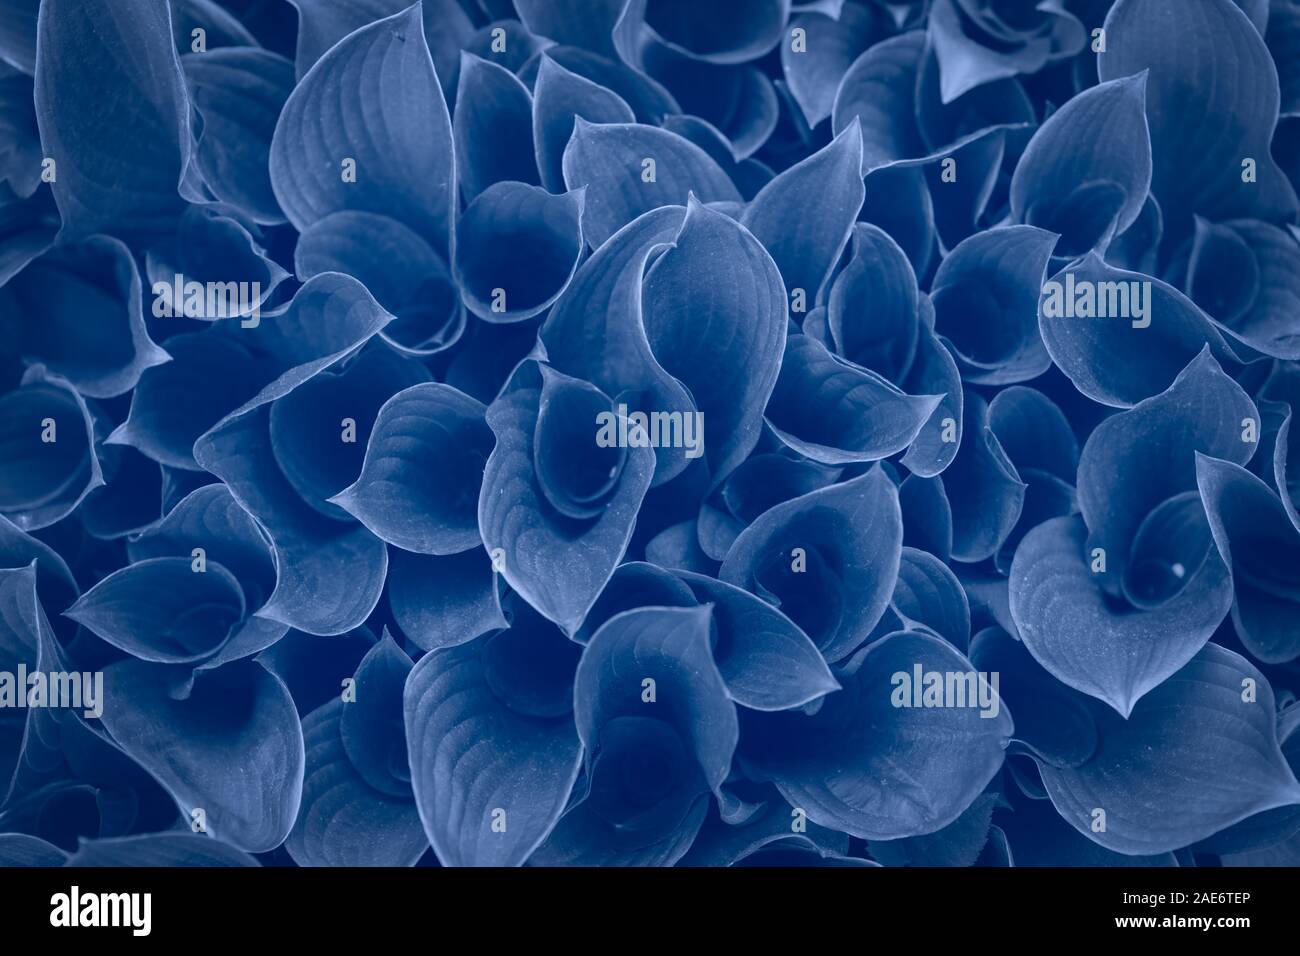 Hosta leaves classic blue trendy color of the year 2020 toned image Stock Photo